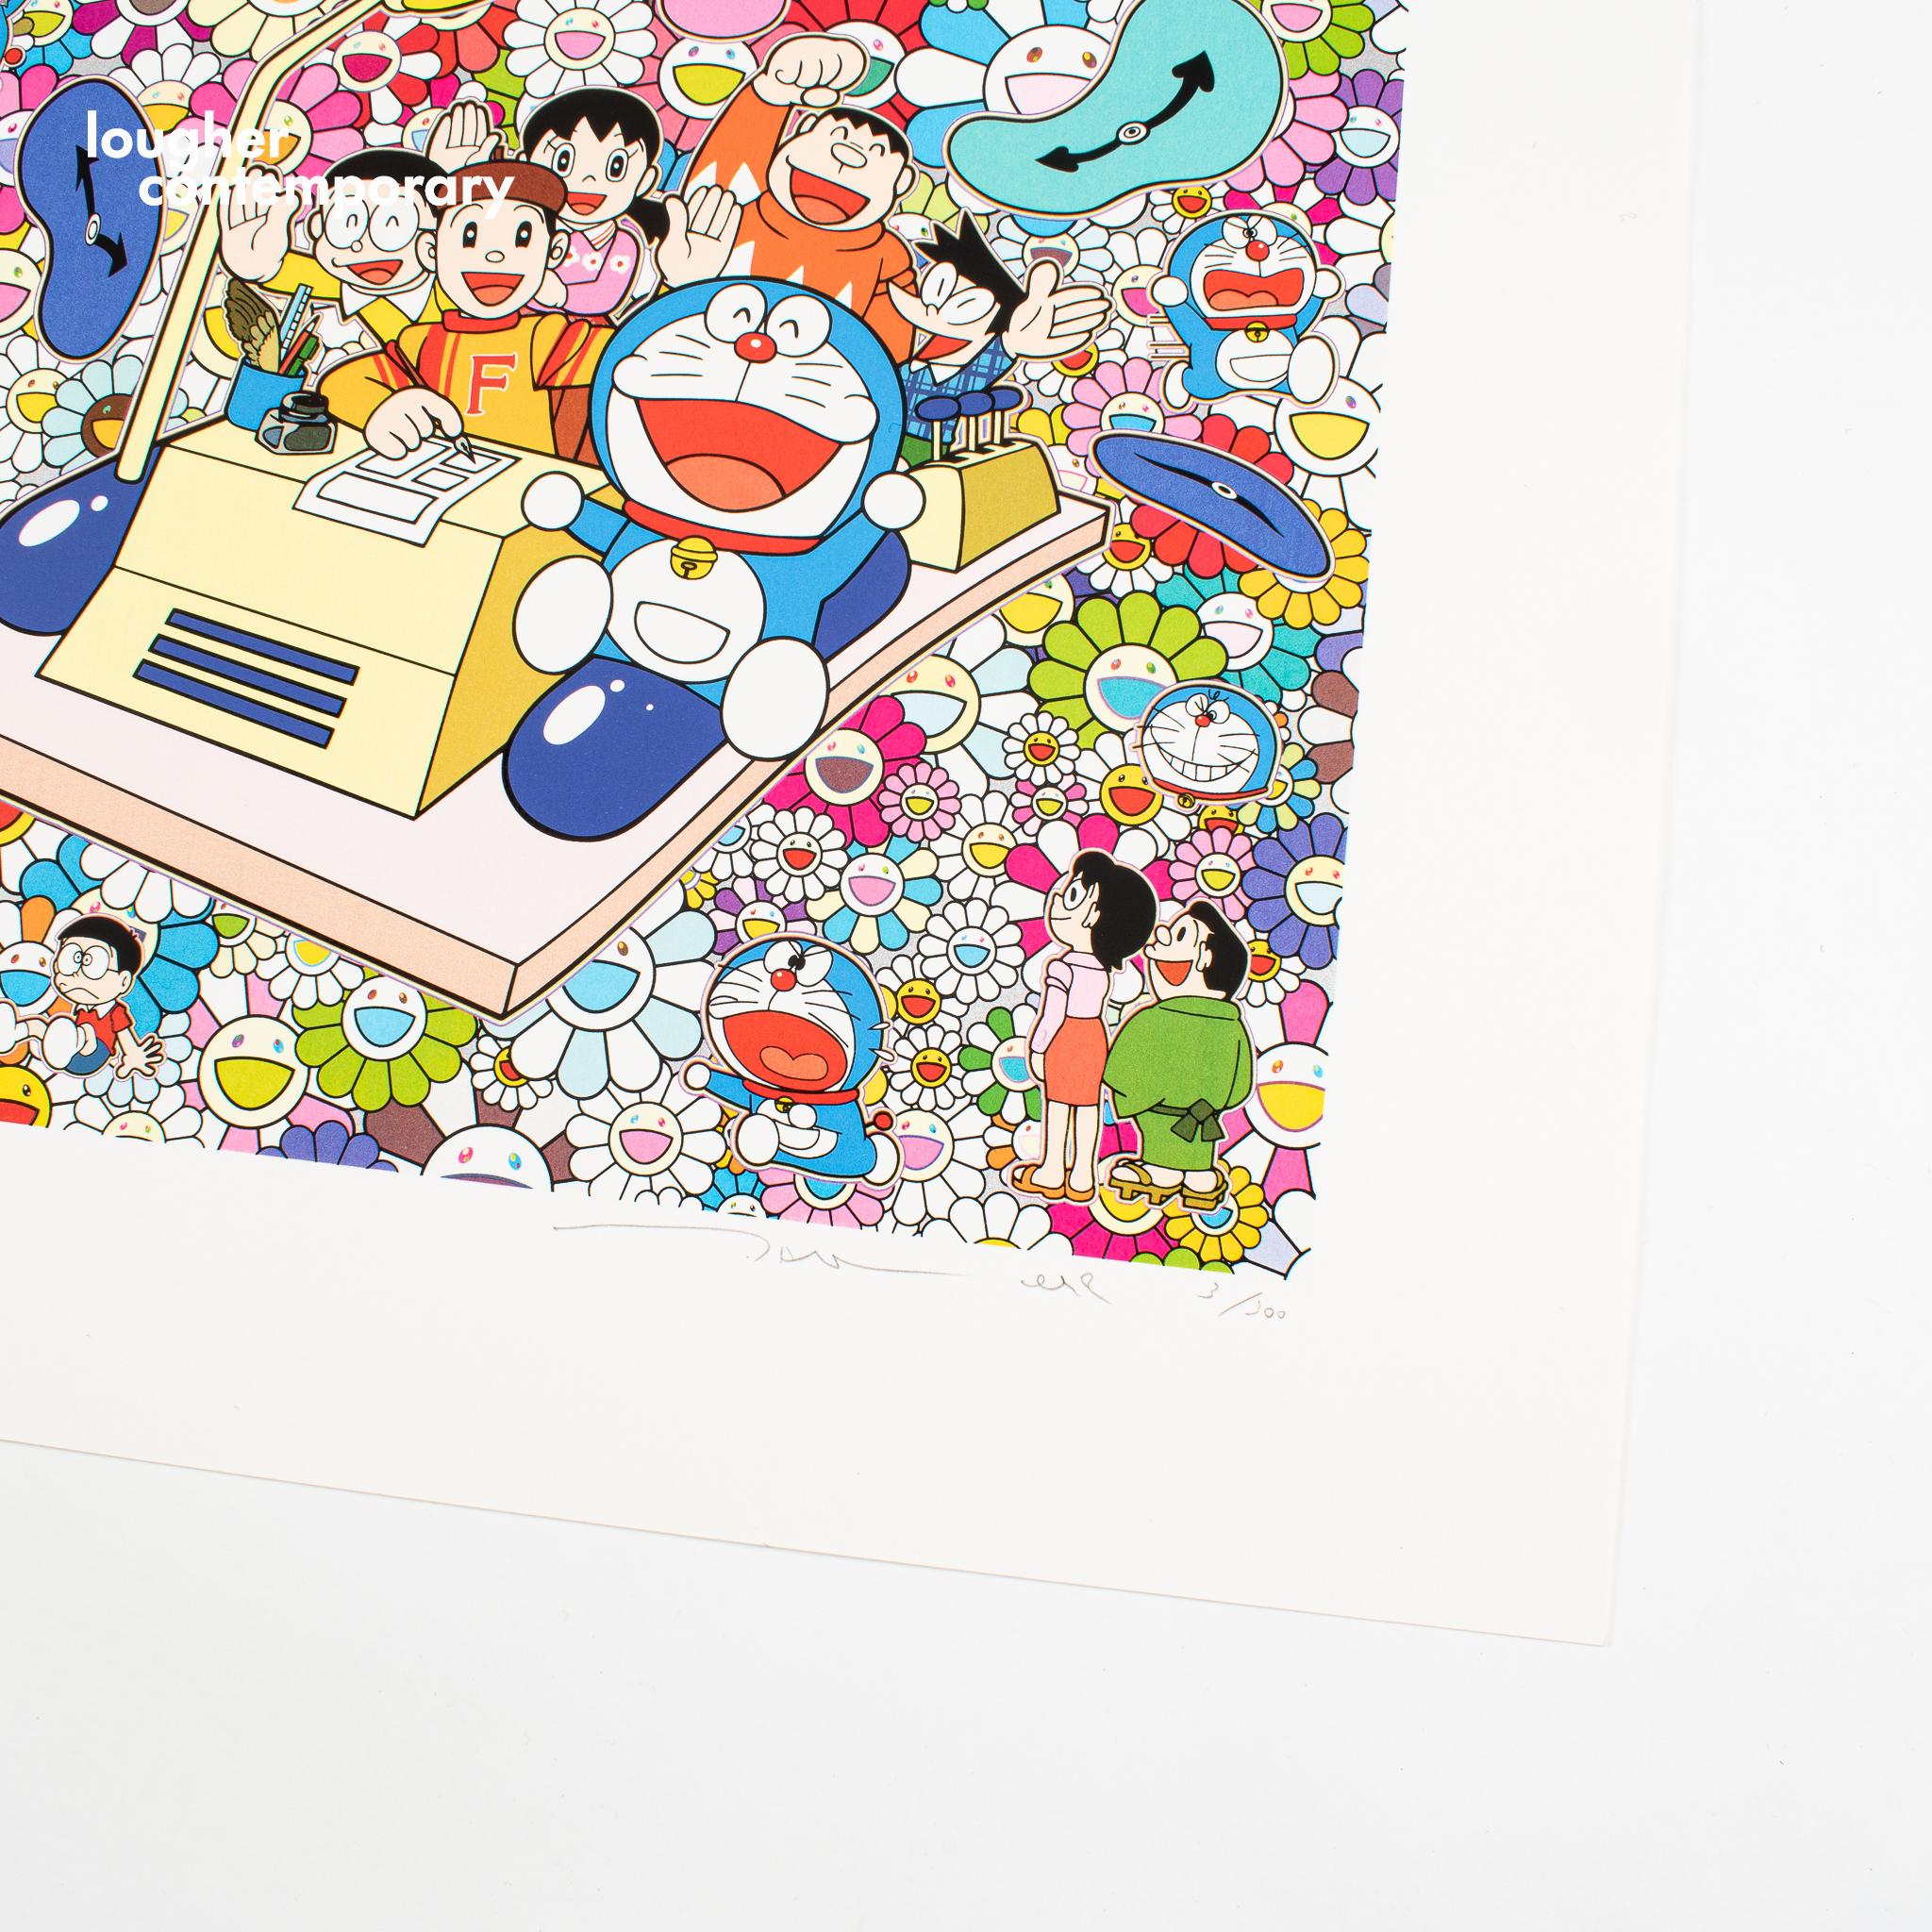 Wouldn't It Be Nice If We Could Do Such A Thing - Contemporary Print by Takashi Murakami